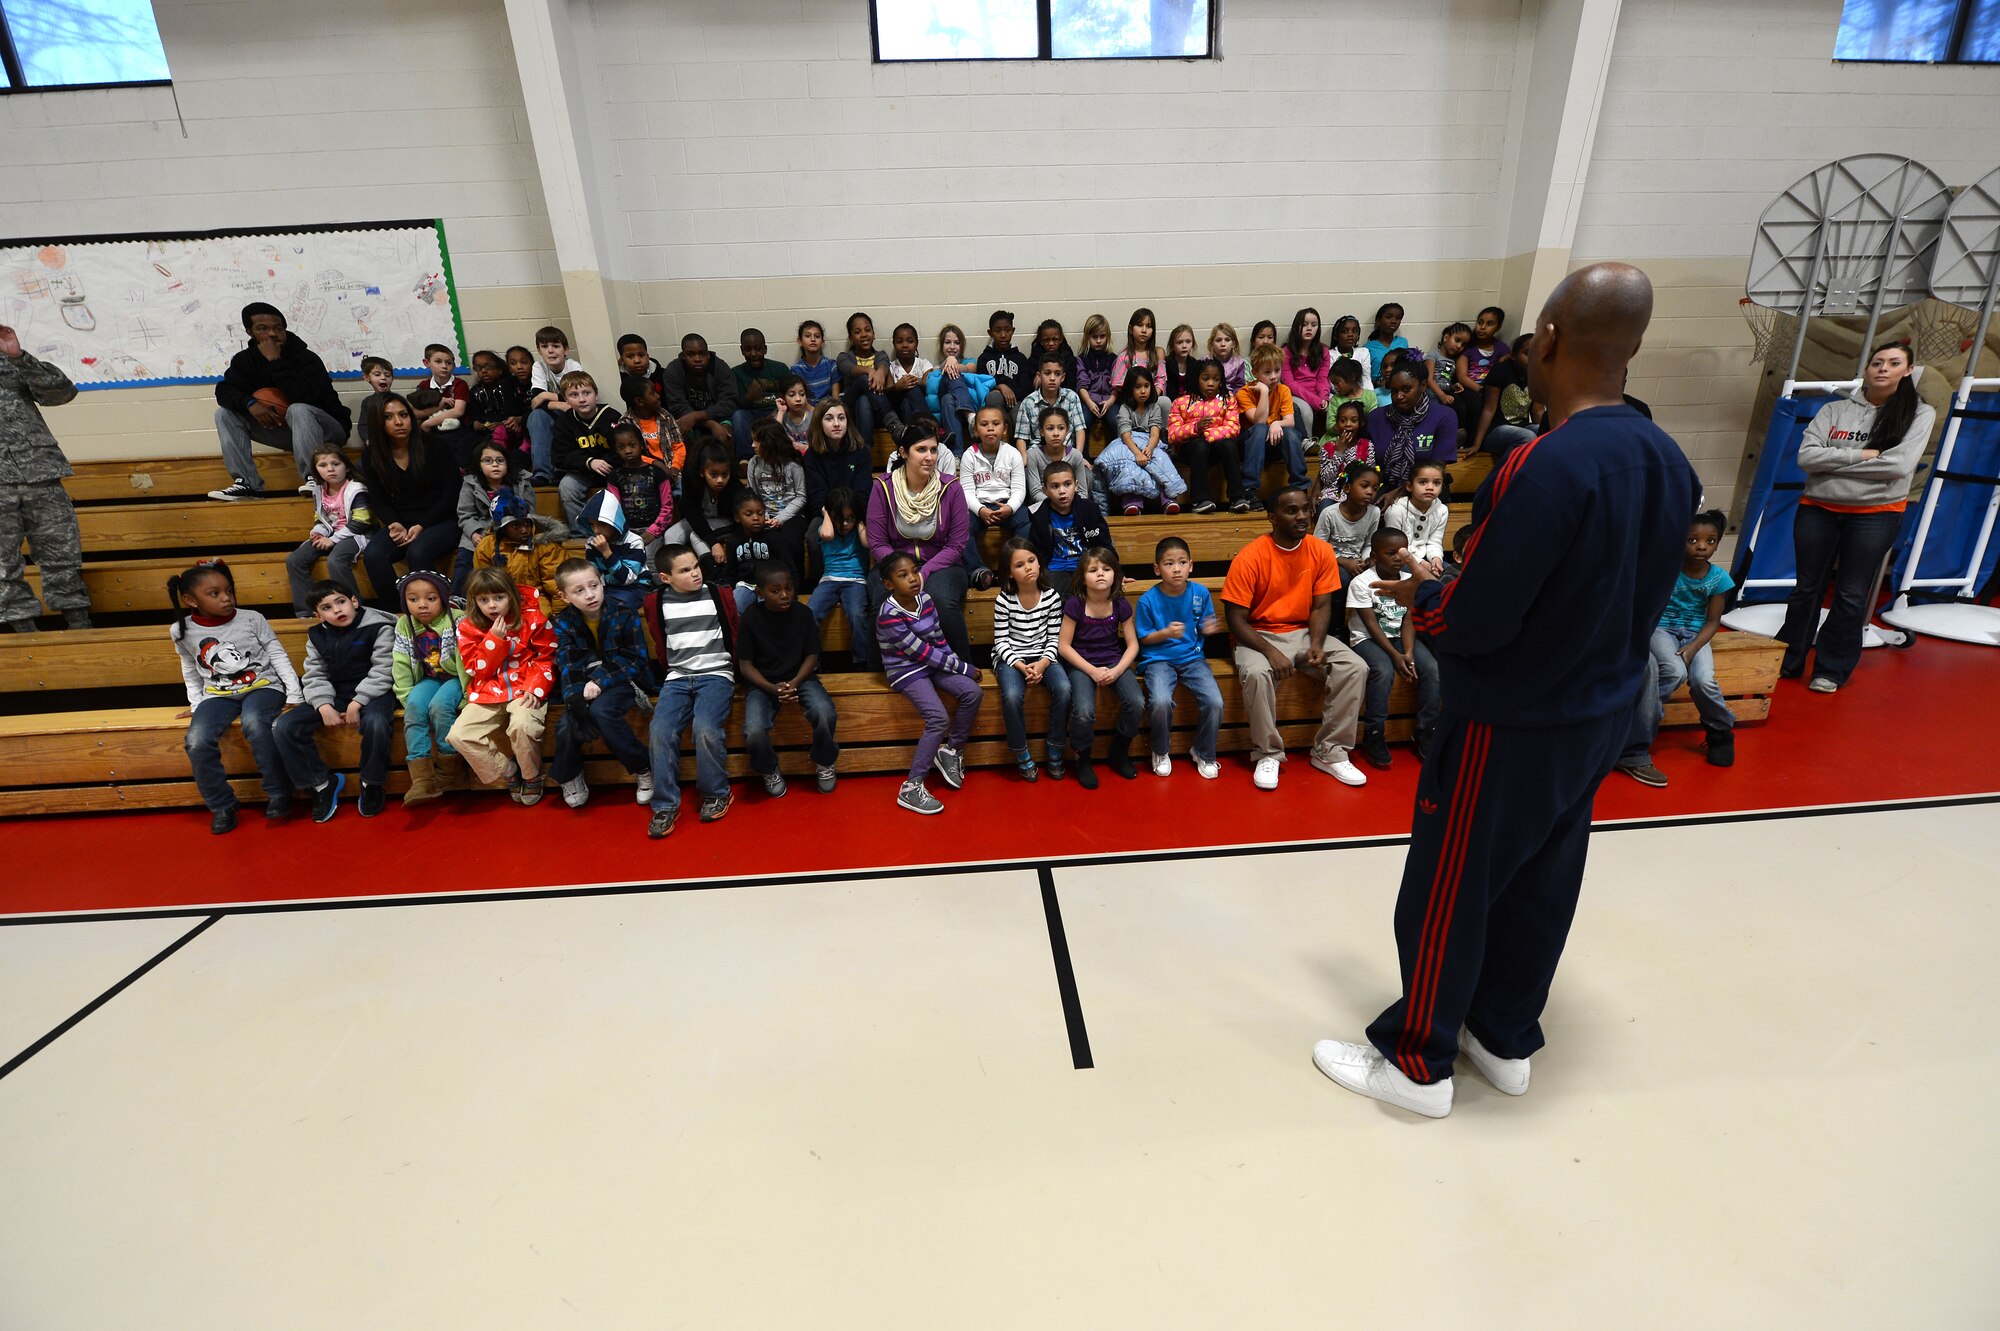 Derrick Stafford, National Basketball Association referee, speaks to kids at the Shaw Air Force Base youth center, S.C., Dec. 14, 2012.  Stafford is in his 25th NBA season and has served twice on the executive board of the NBA Referee Association.  (U.S. Air Force photo by Airman 1st Class Nicole Sikorski/Released)